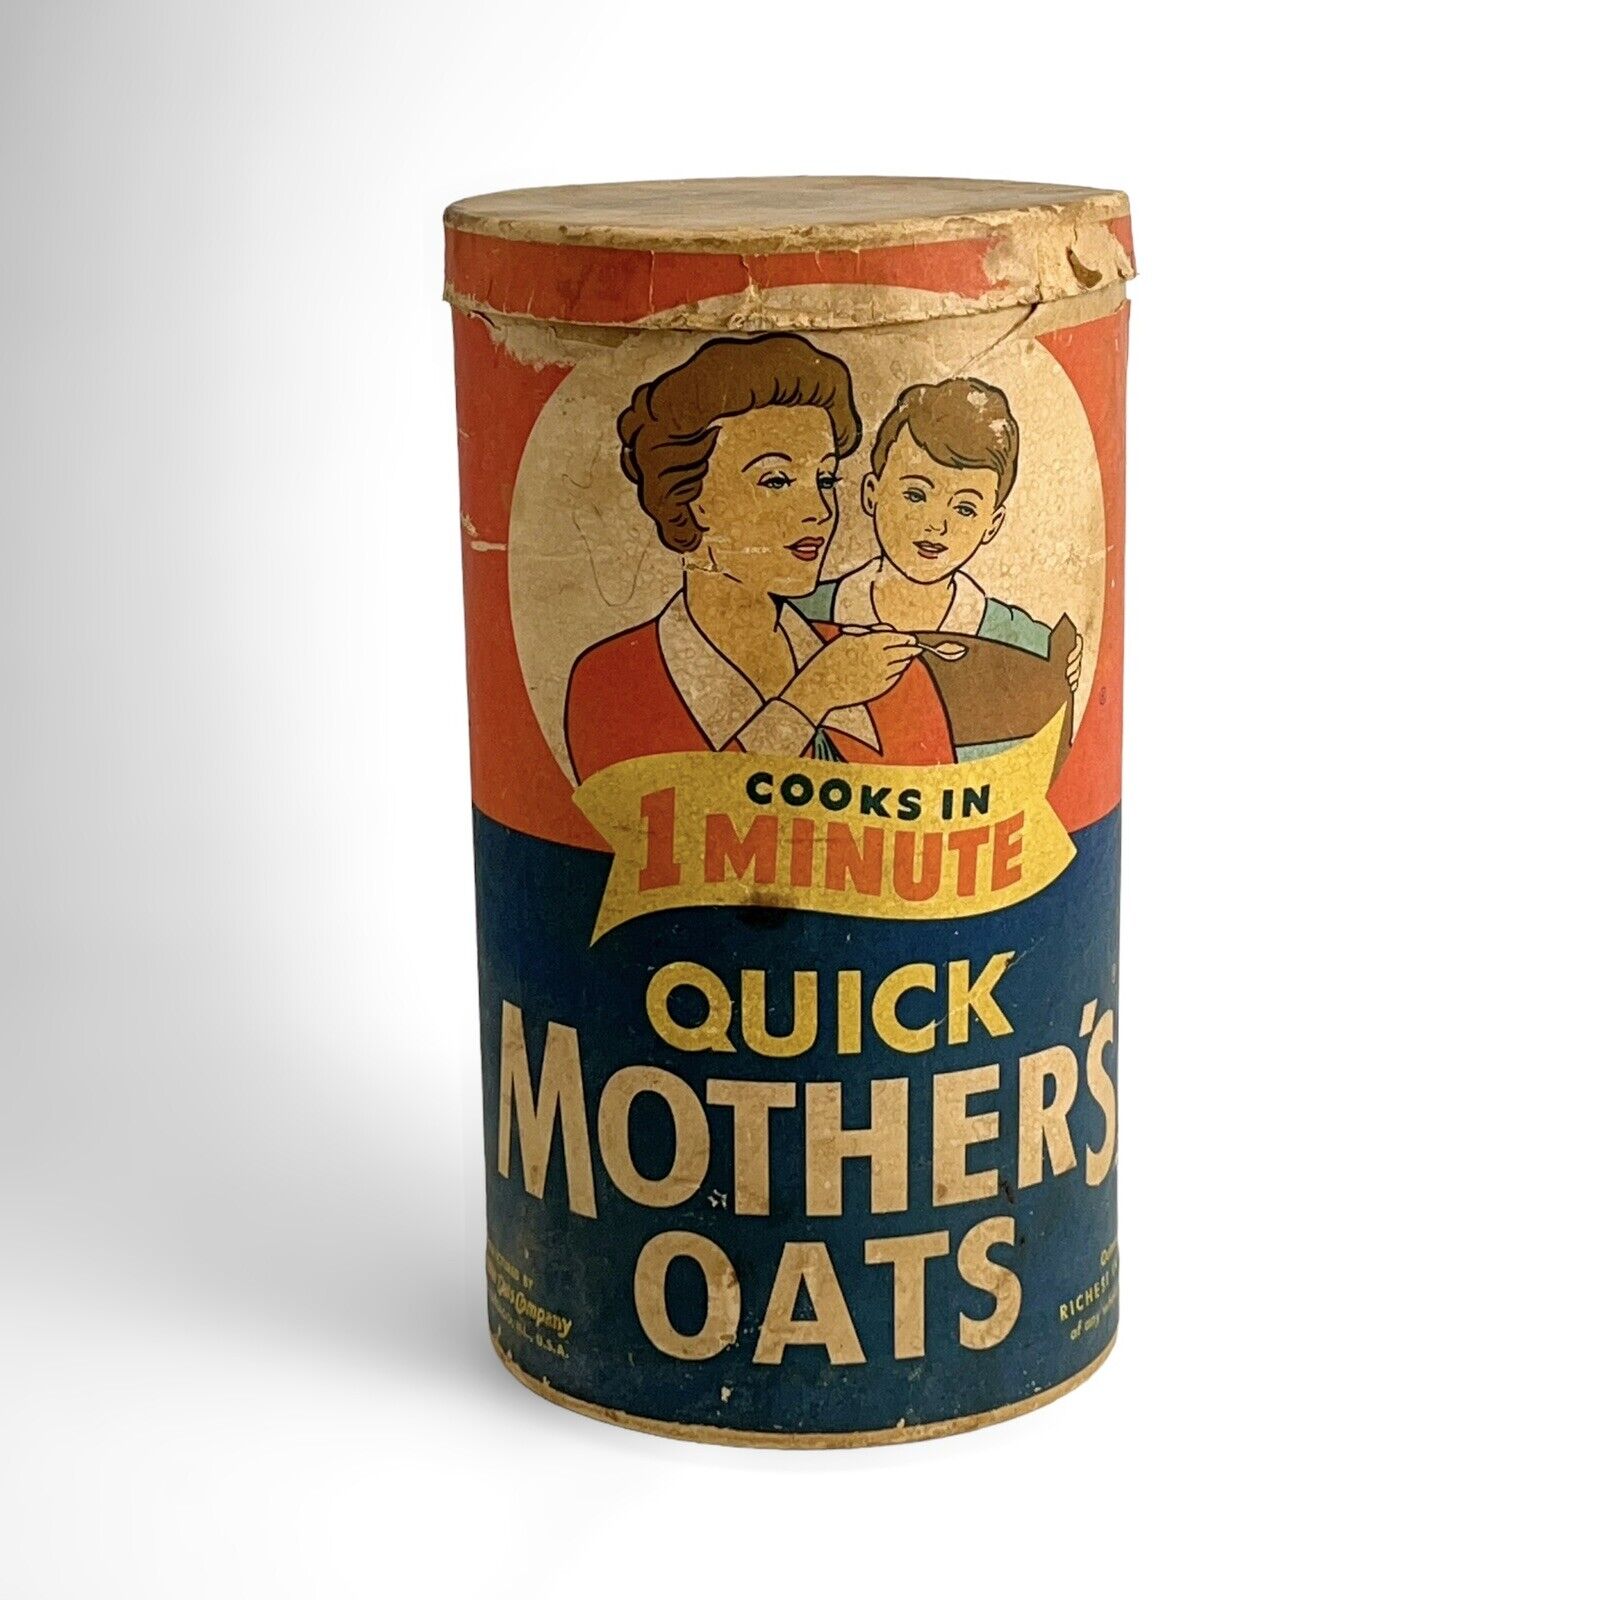 VINTAGE MOTHER'S QUICK OATS CONTAINER QUAKER OAT COMPANY ADVERTISING